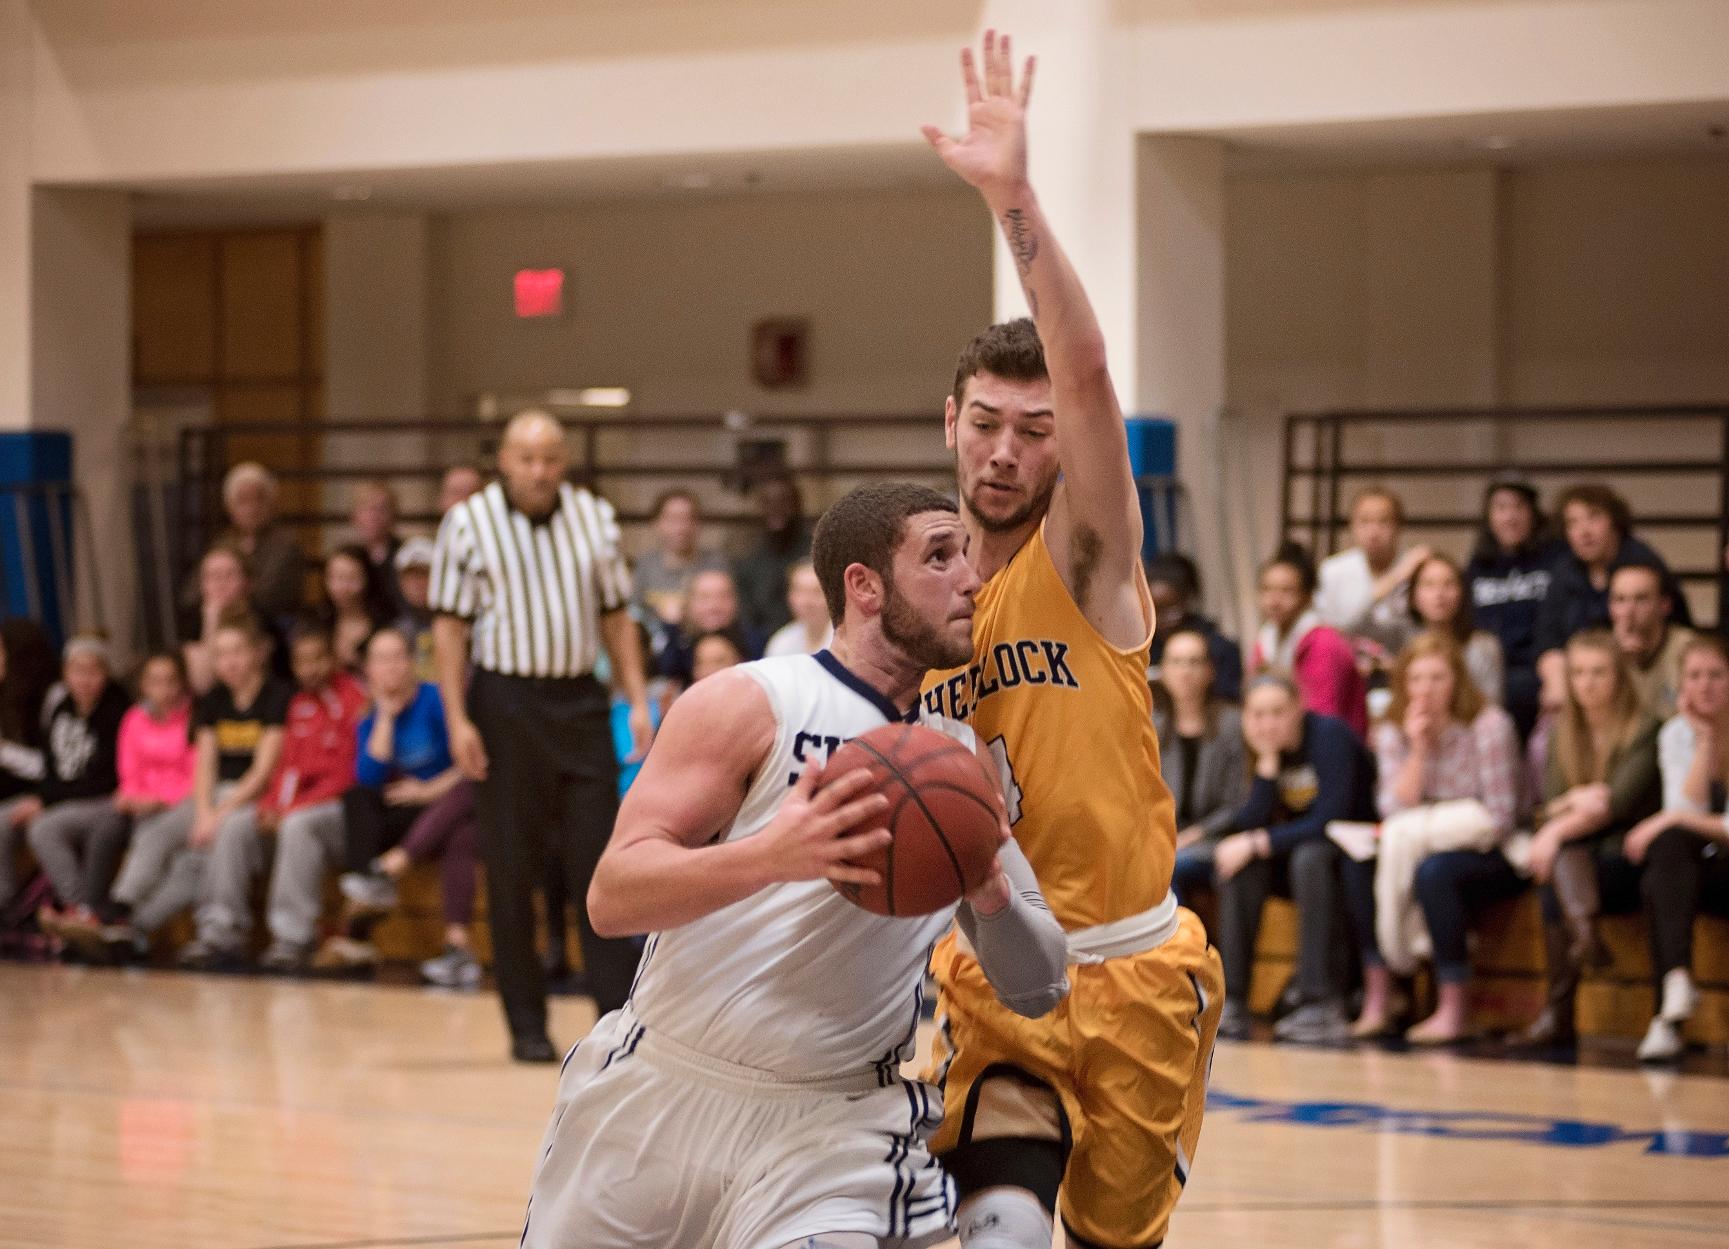 Chick Paces Men’s Basketball in 58-53 Victory Over SJC